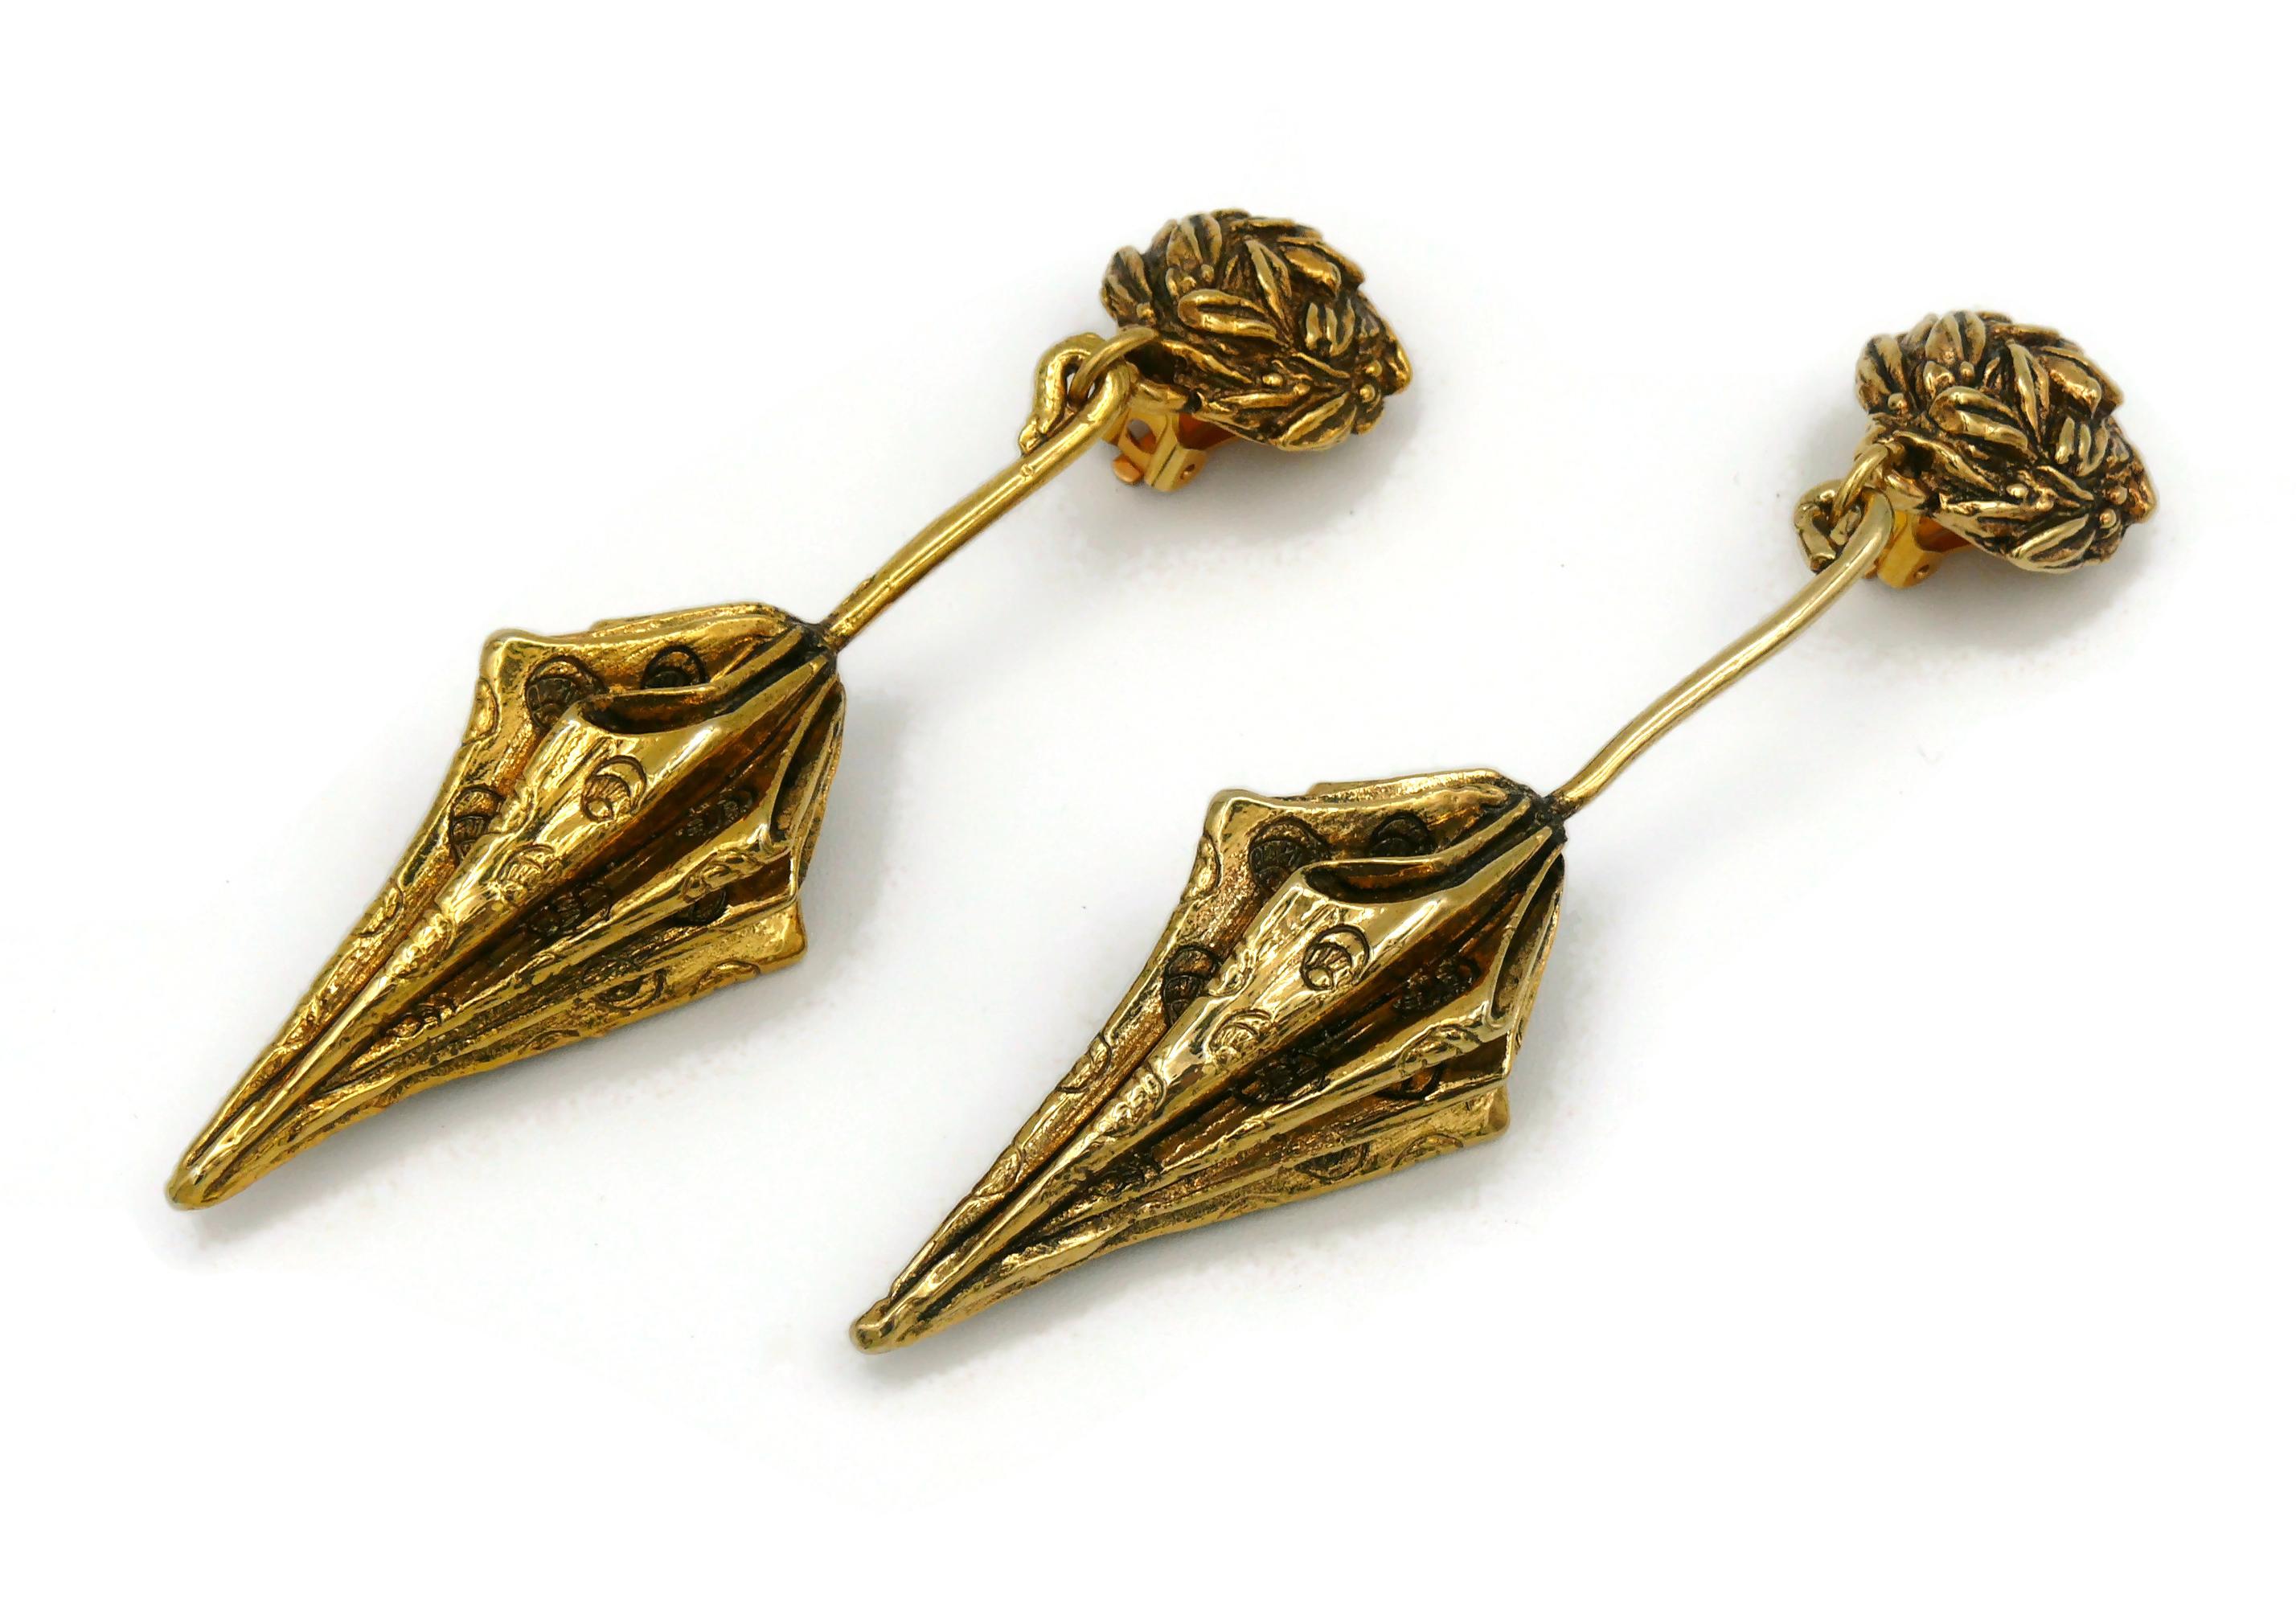 Chantal Thomass (Attributed to) Vintage Umbrella Dangling Earrings For Sale 2